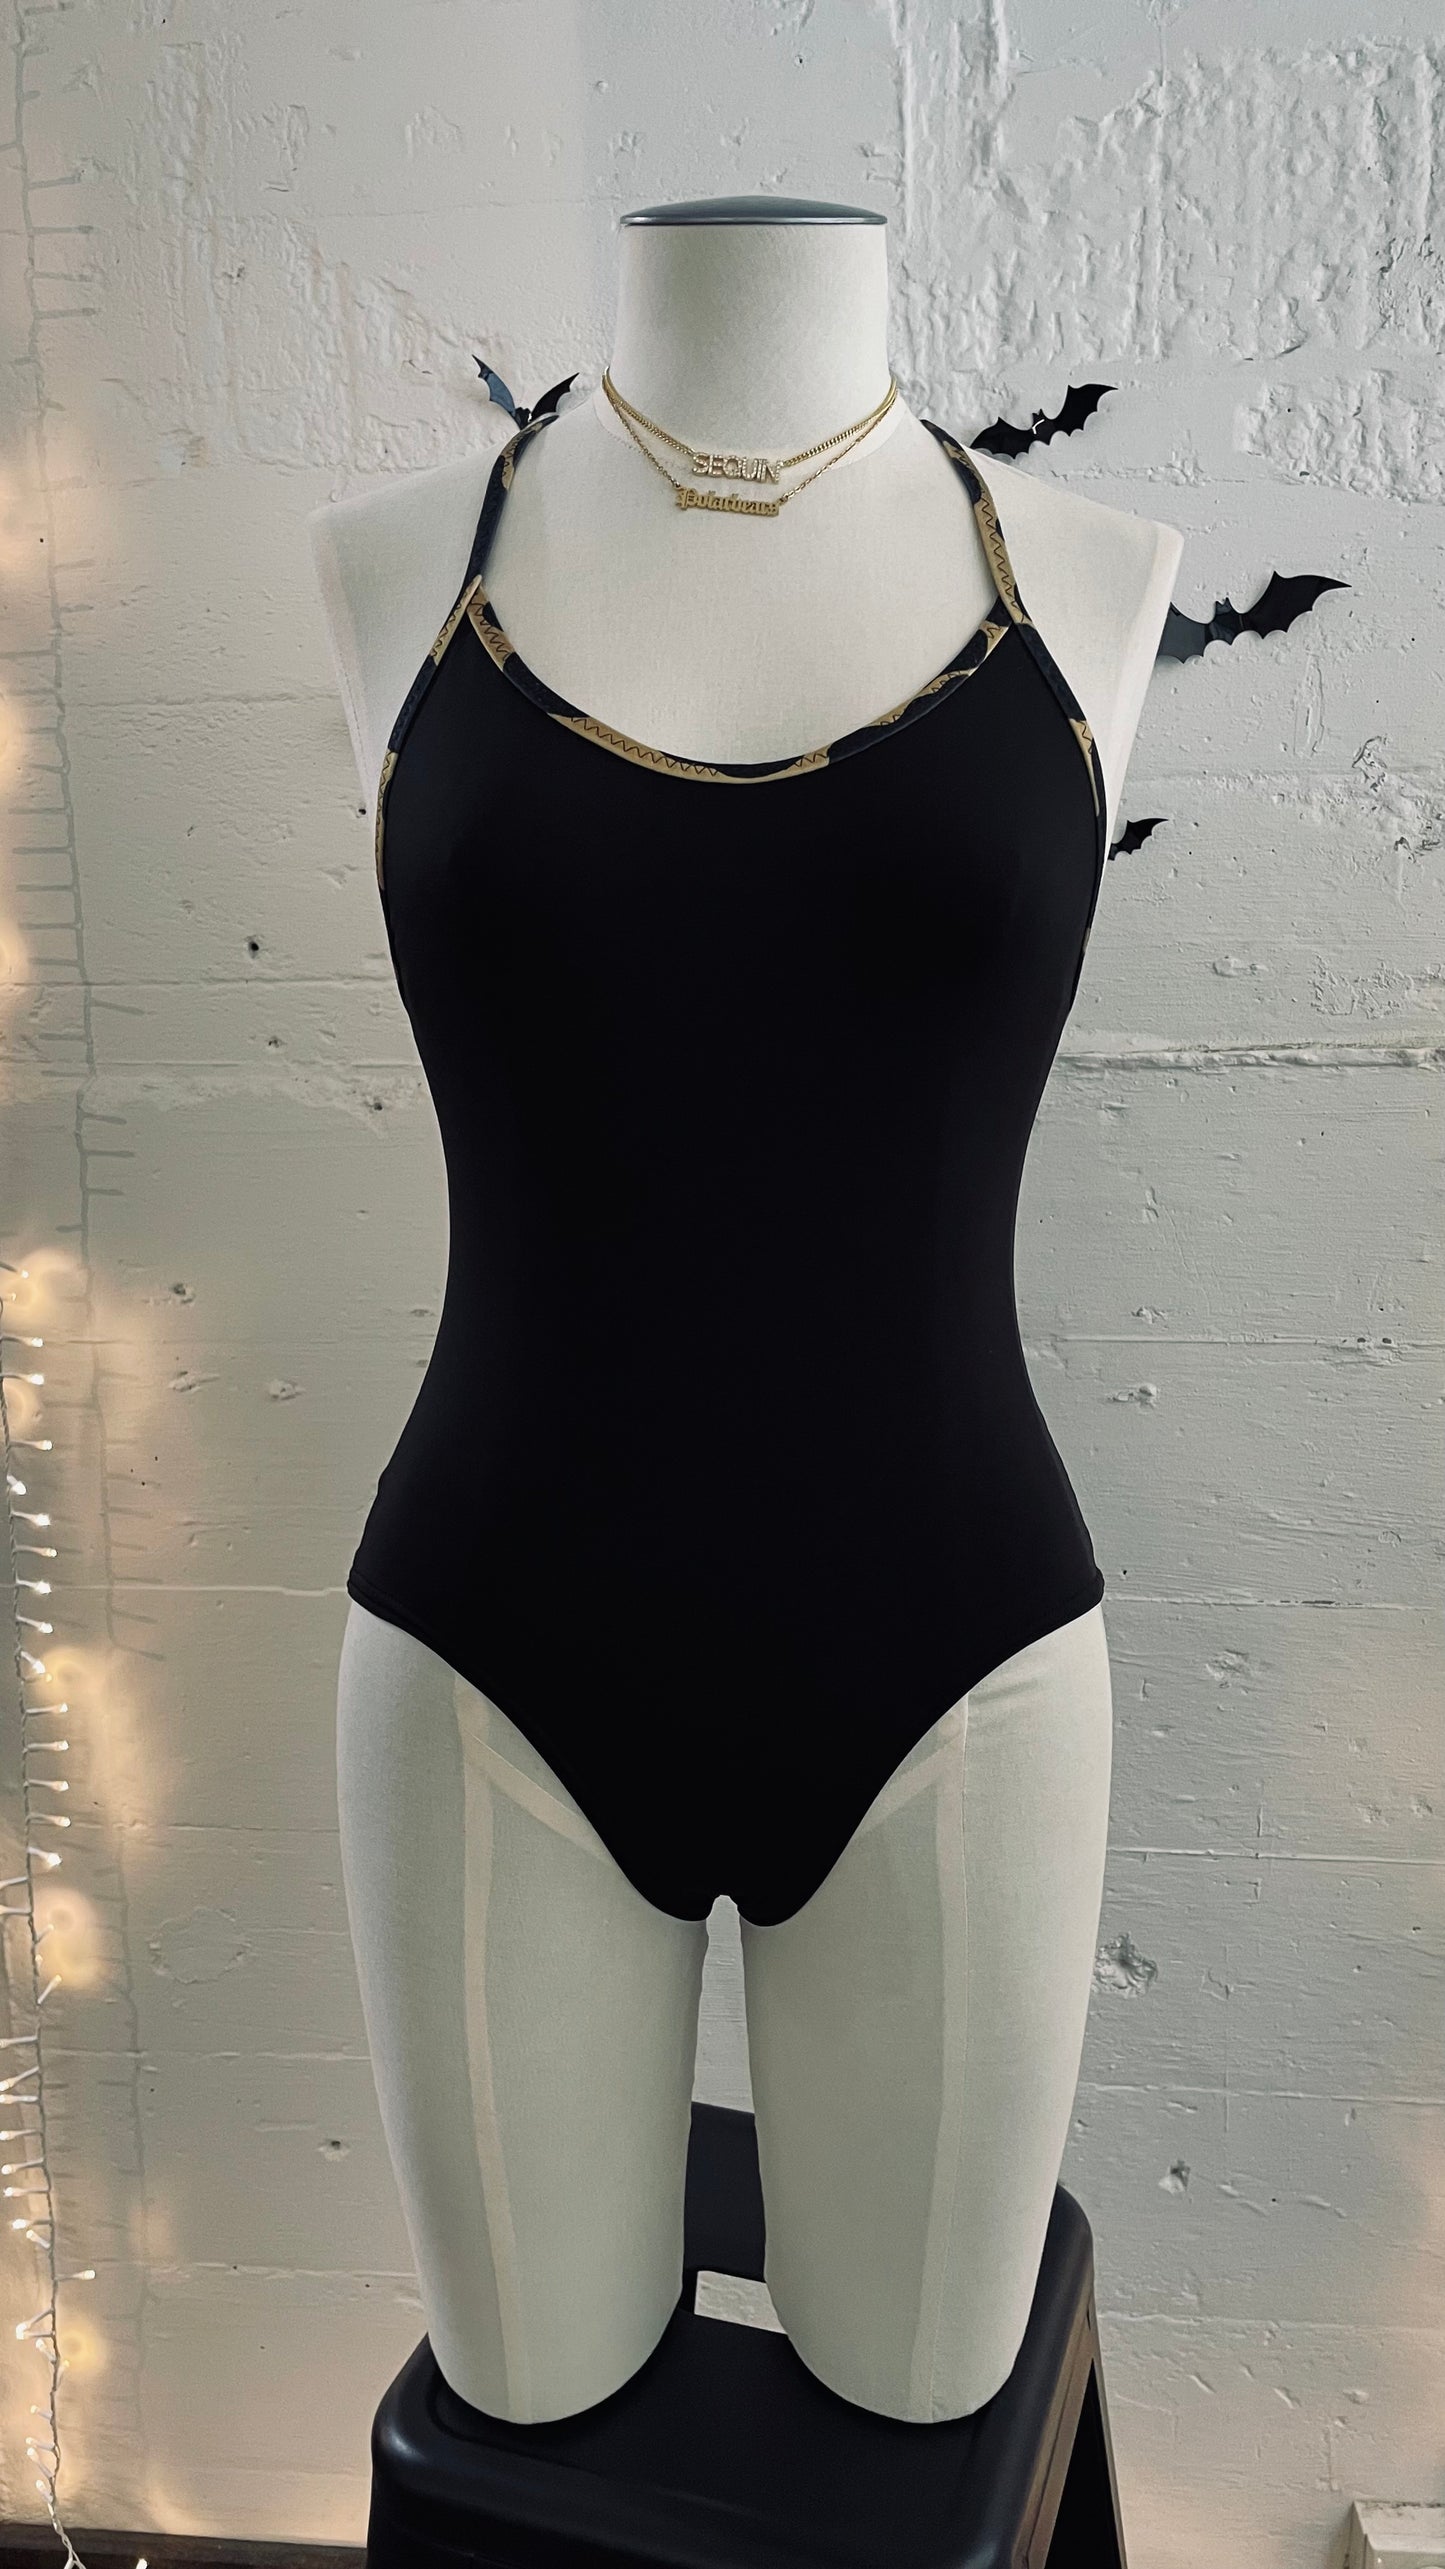 Backless one piece / S / Black with leopard binding